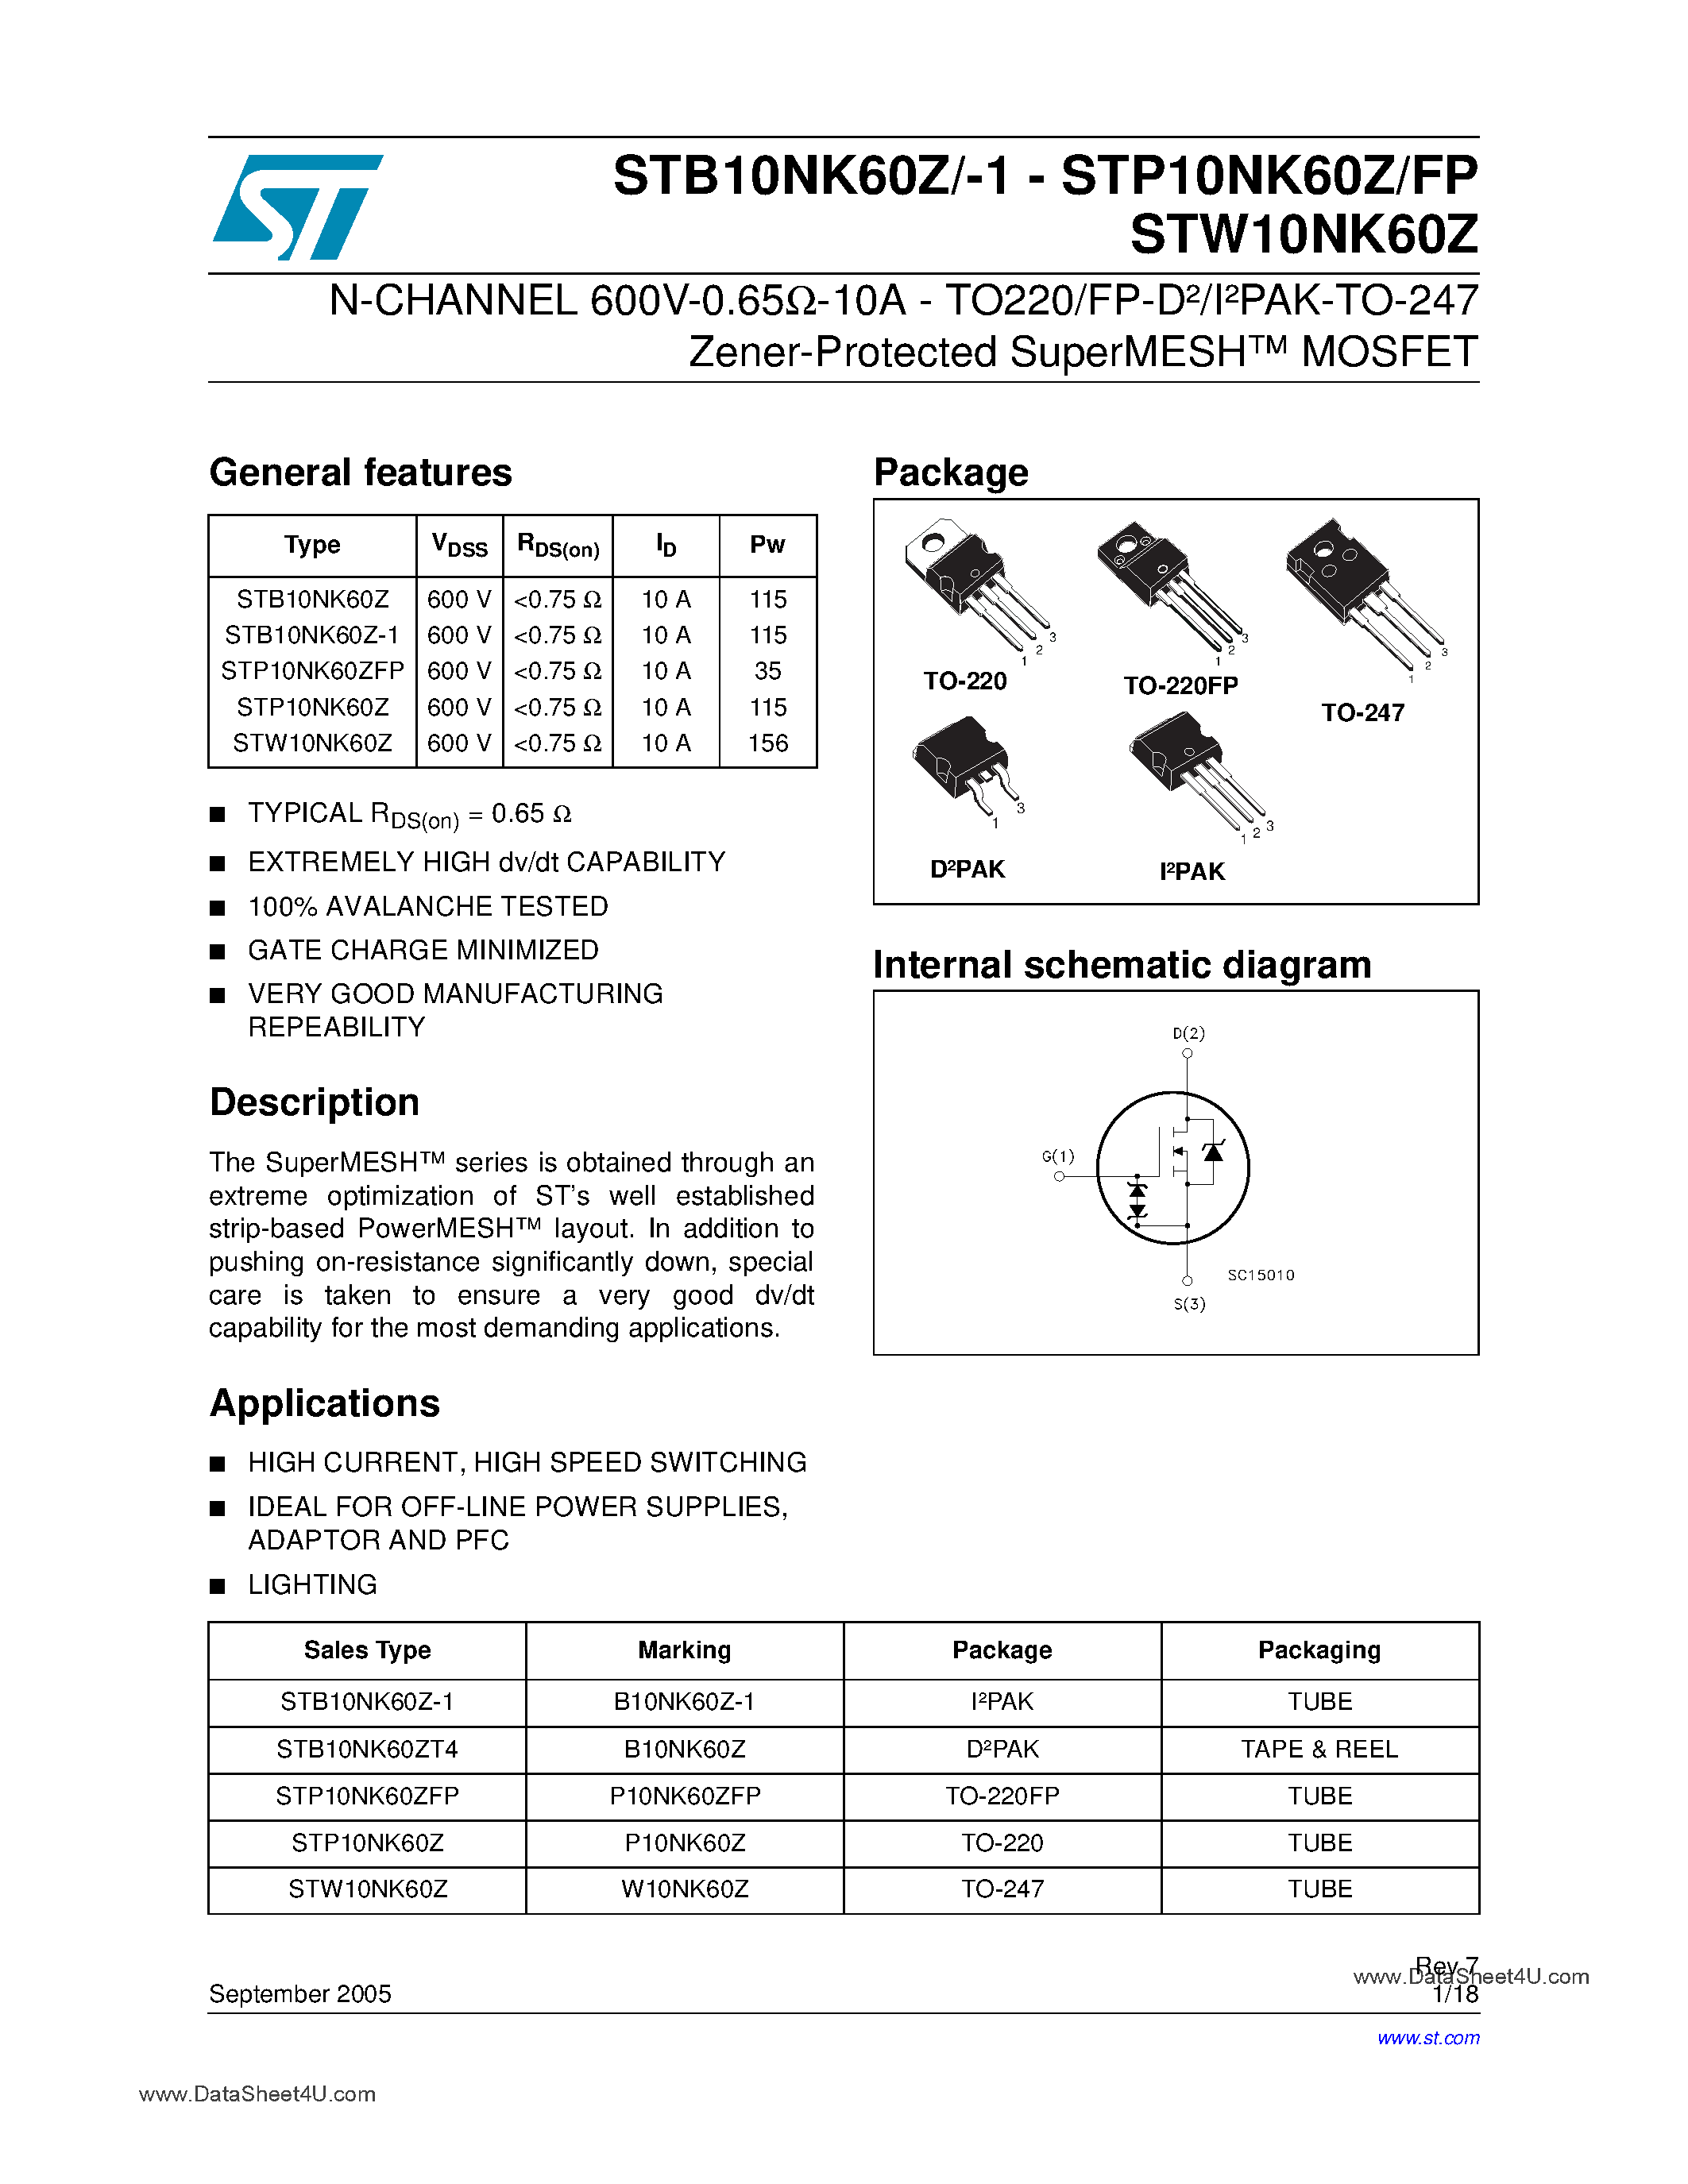 Datasheet STP10NK60Z - N-CHANNEL Power MOSFET page 1